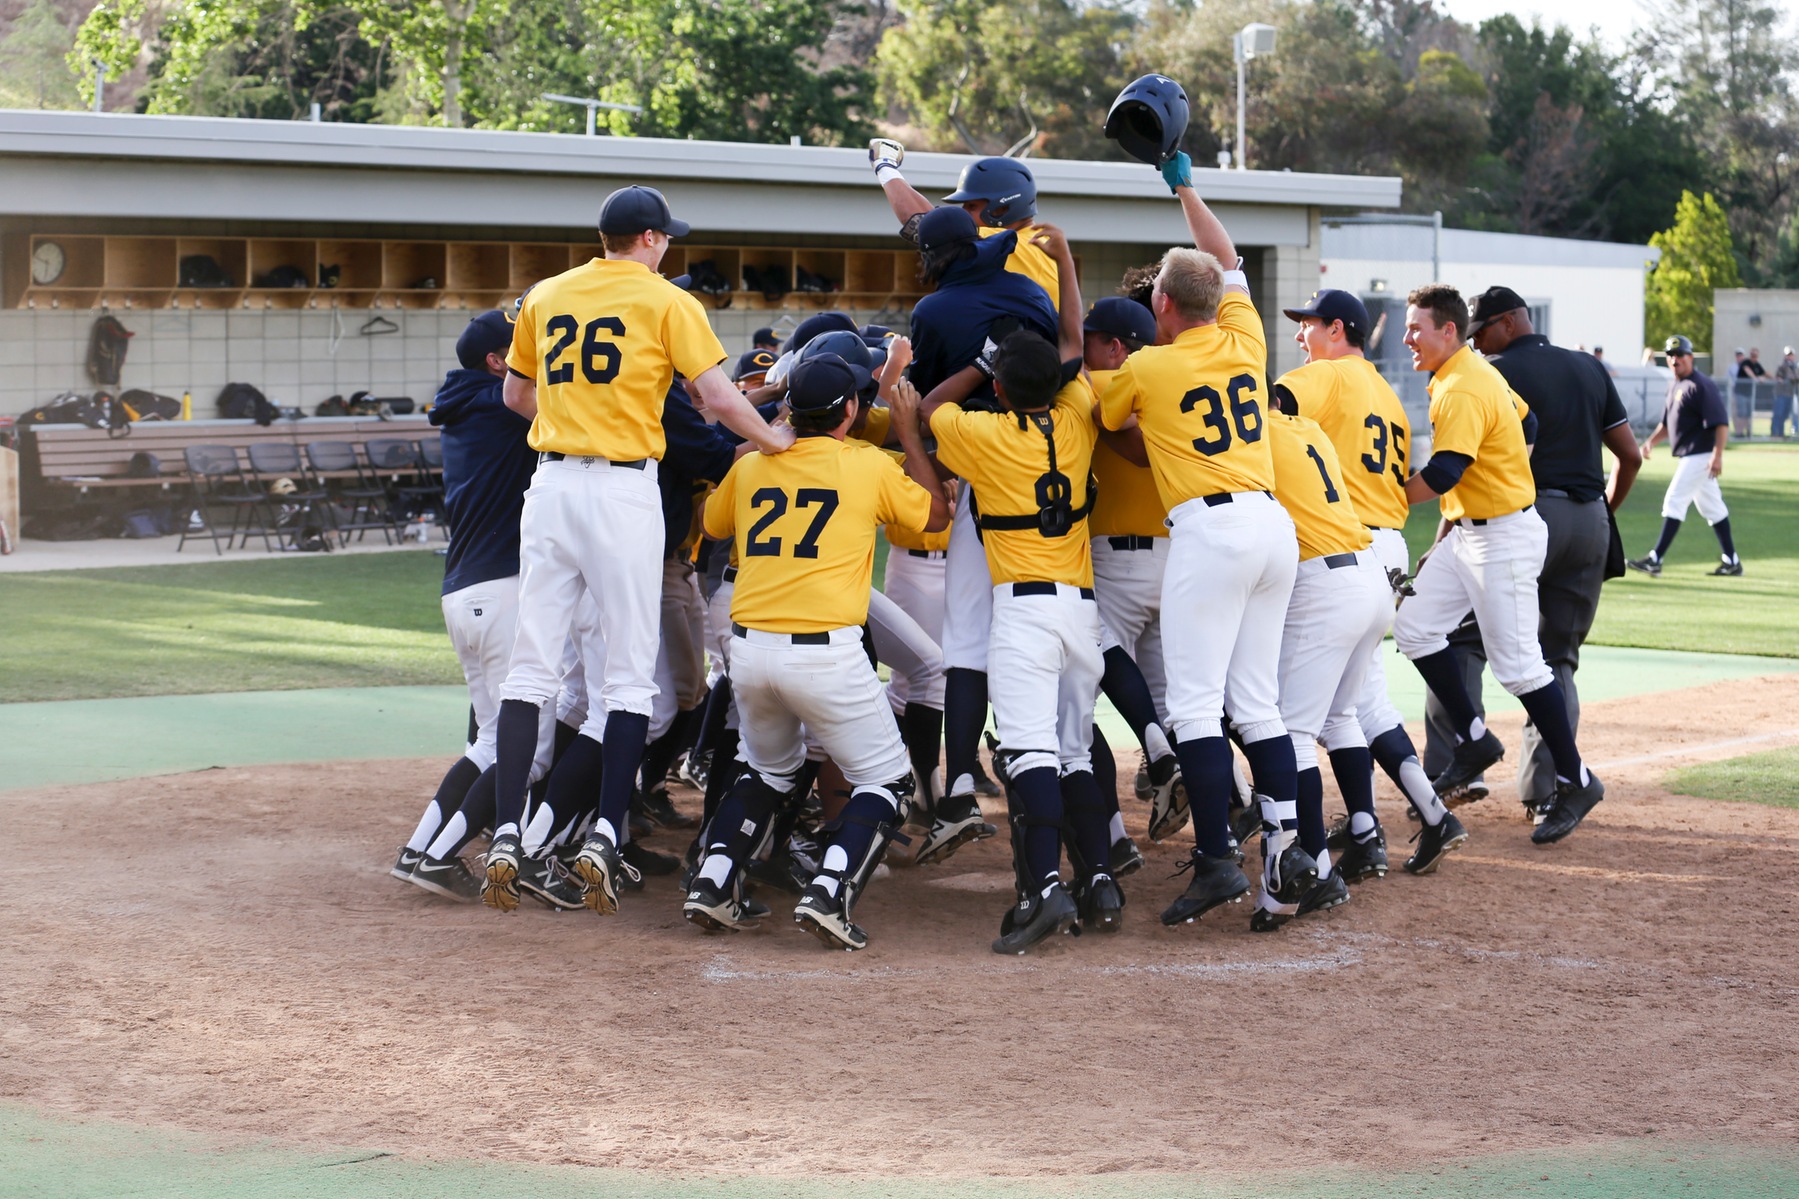 Canyons Clinches WSC East Championship with 10-8 Walk-Off Win Over Glendale